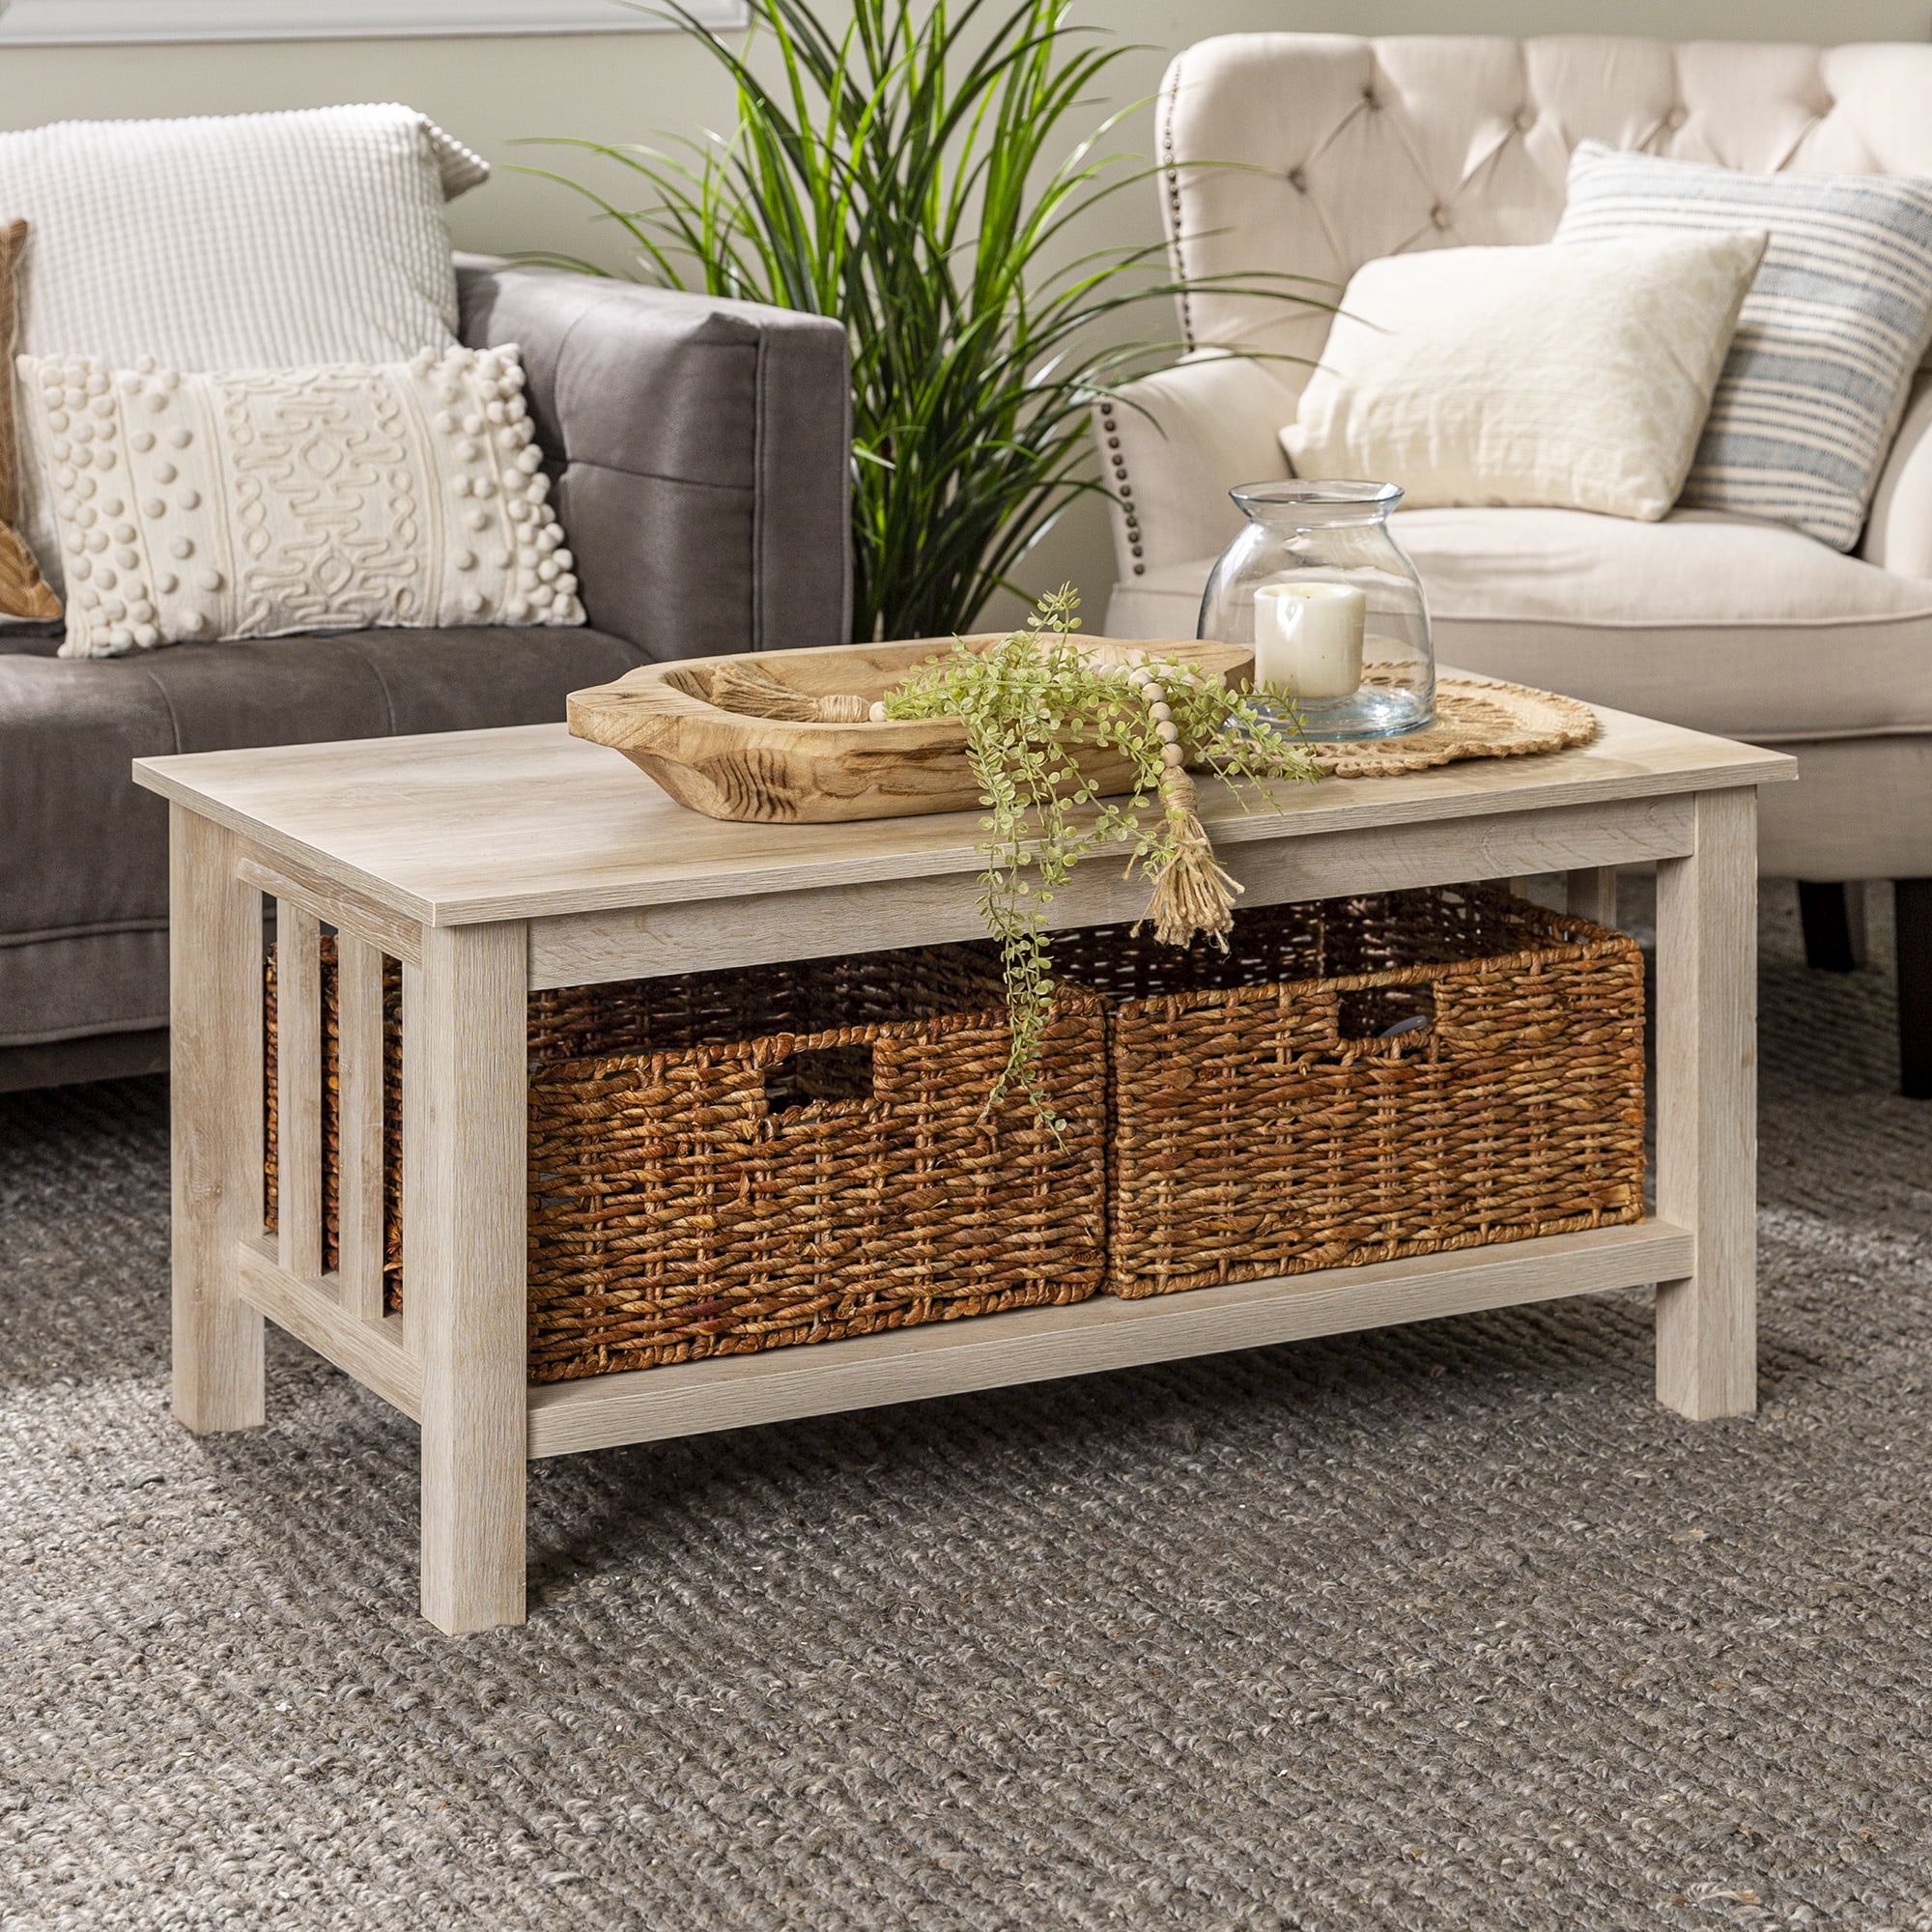 Woven Paths Traditional Storage Coffee Table With Bins, White Oak For Woven Paths Coffee Tables (Gallery 3 of 20)